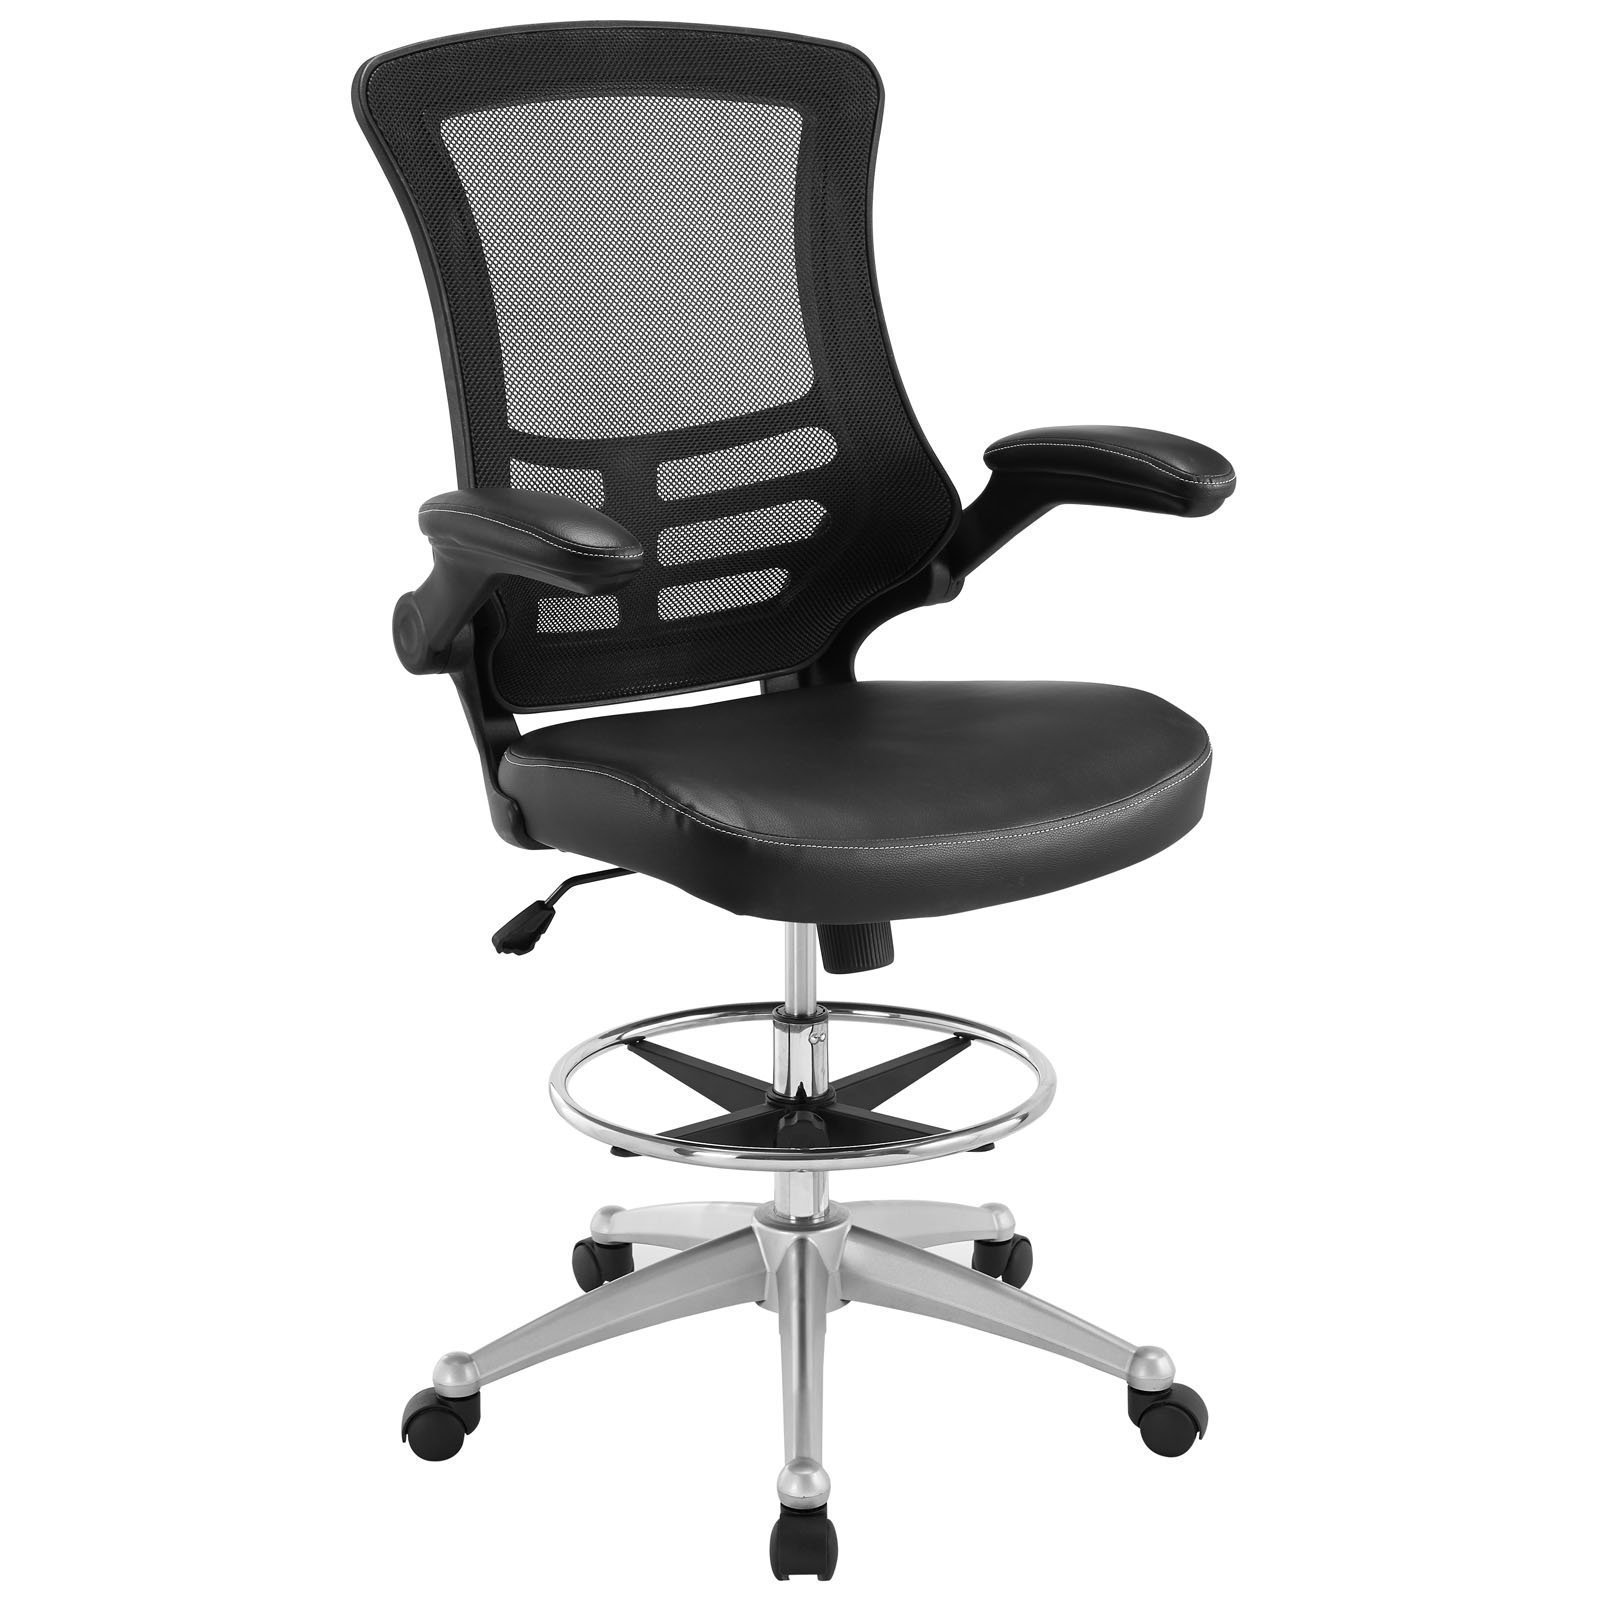 Modway Attainment Drafting Chair In Black - Tall Office Chair For